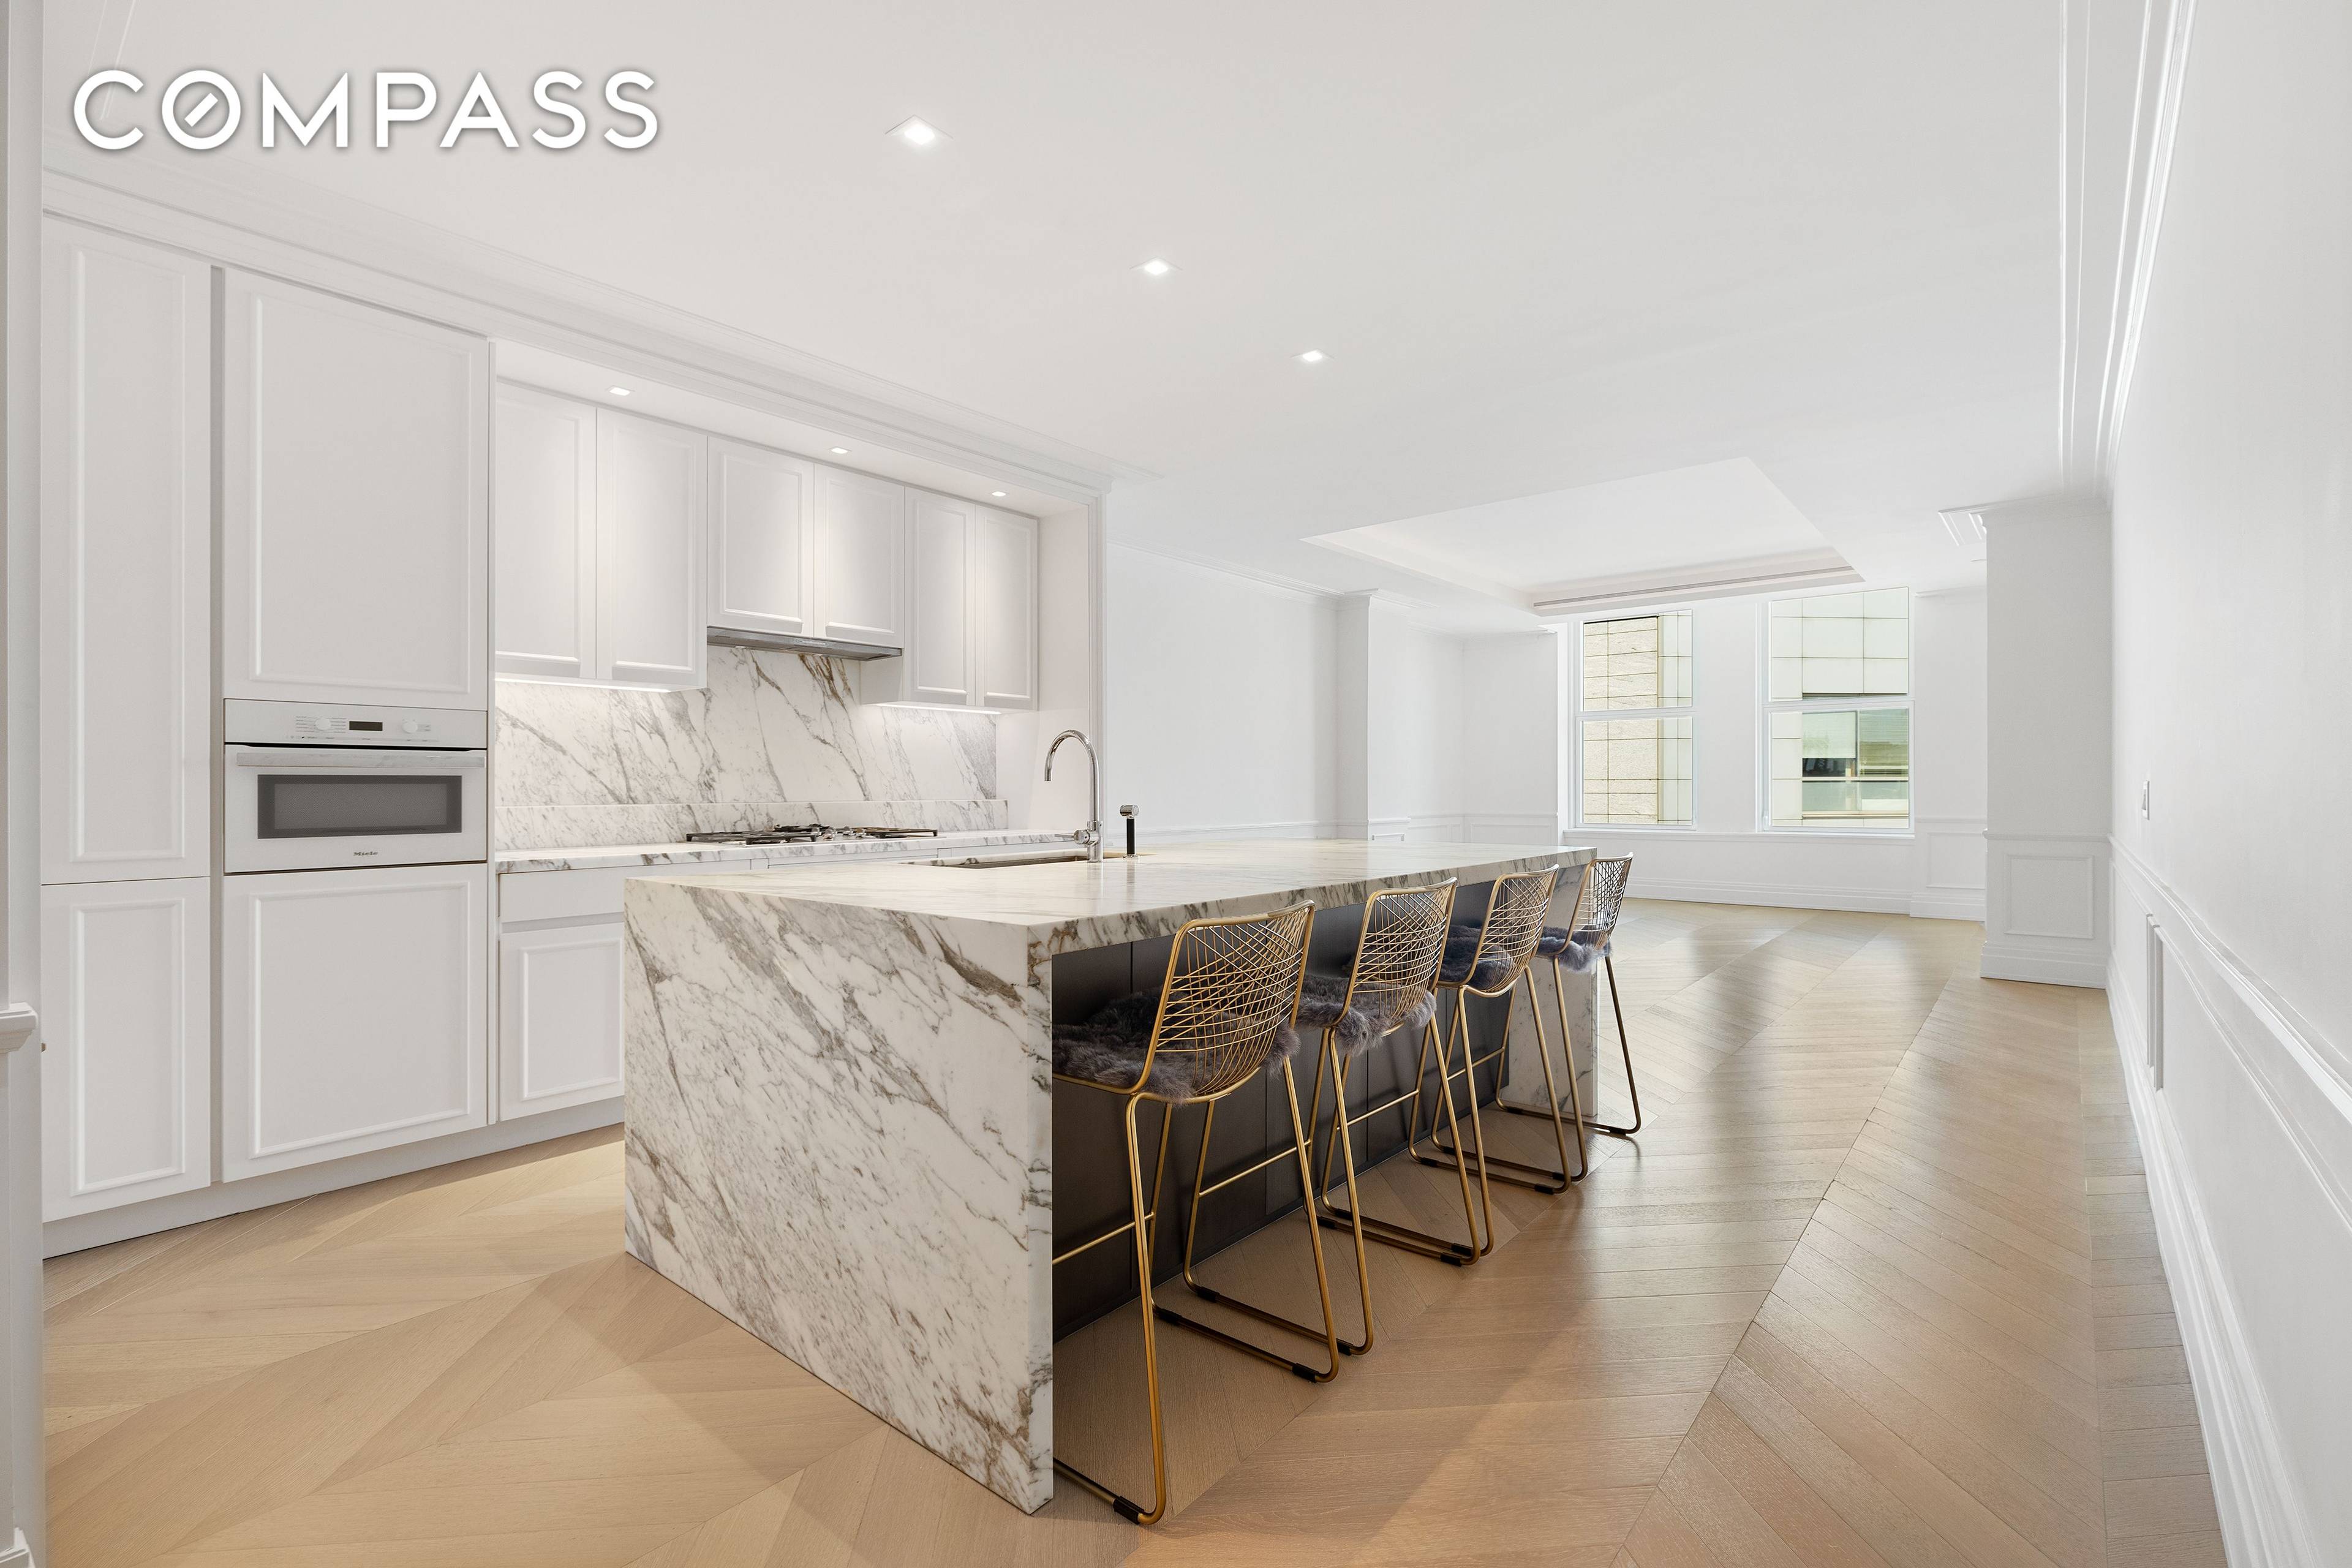 Paying homage to the most coveted elements of an architectural masterpiece at 108 Leonard, ornamental majesty and historic provenance are leveraged anew with fresh modern forms and contemporary design priorities.